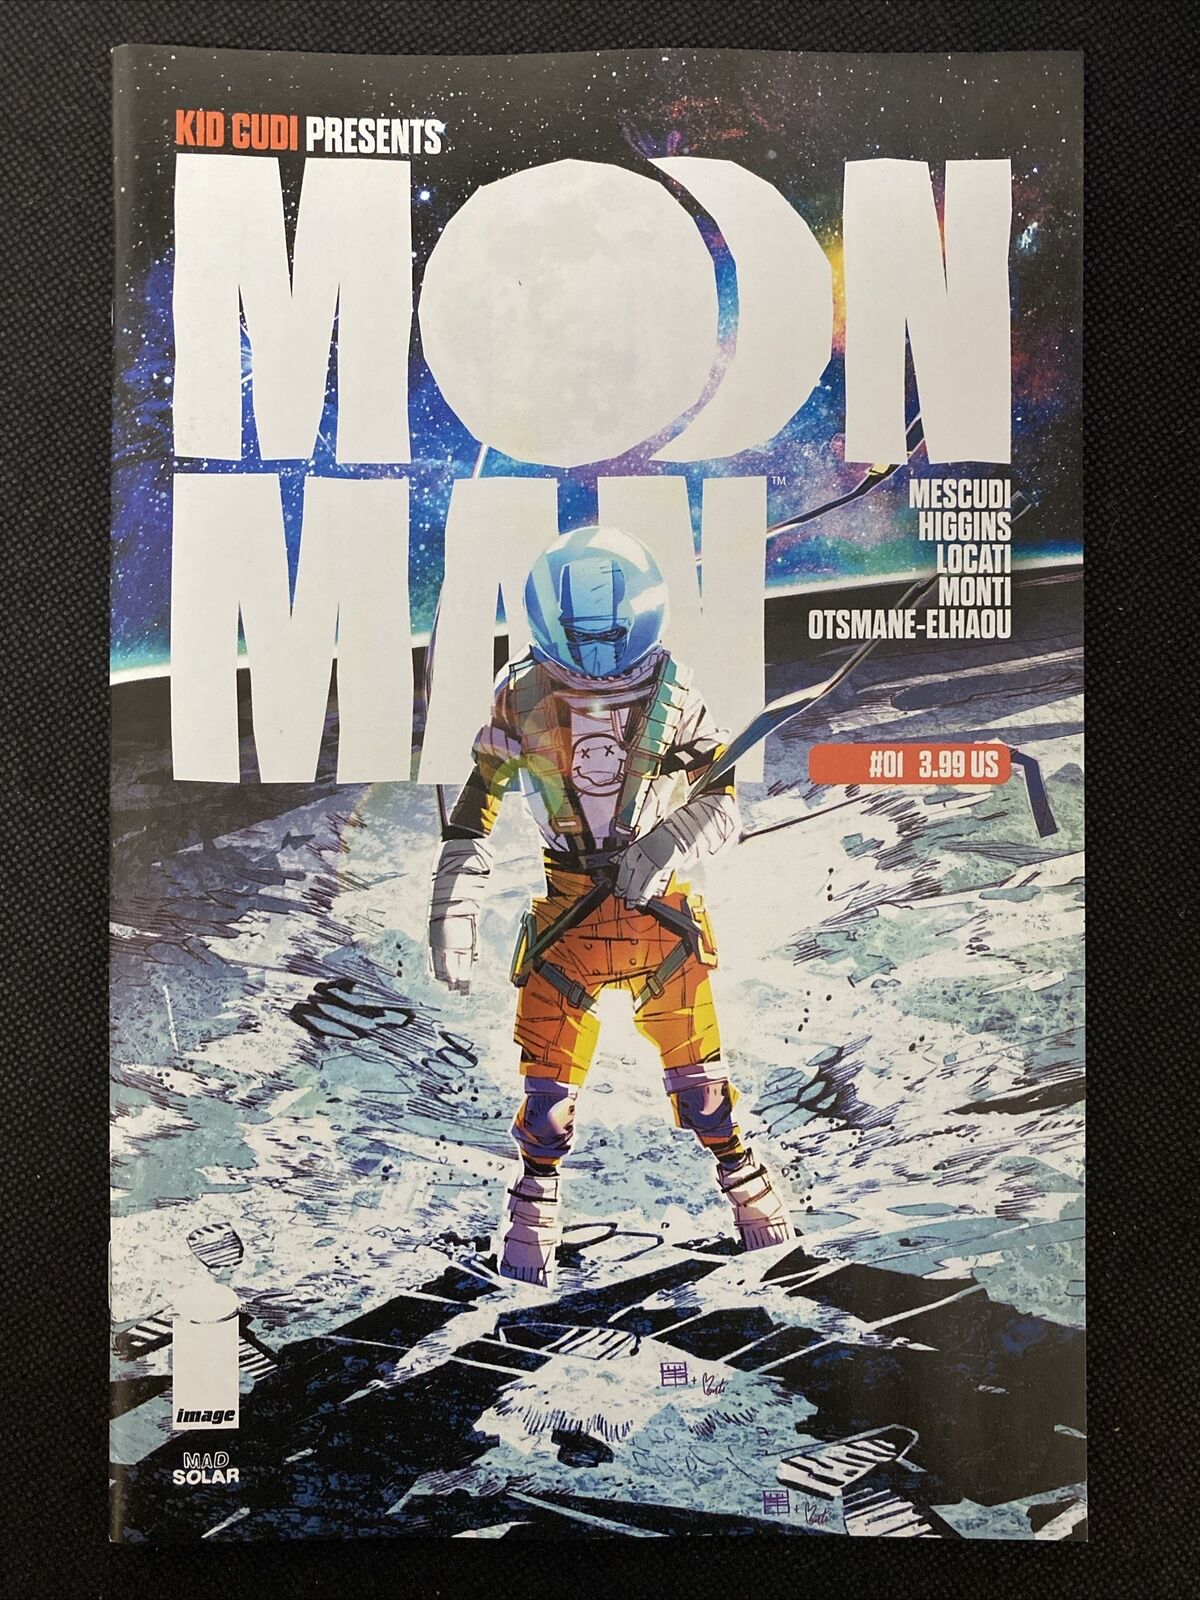 MOON MAN #1 (IMAGE 2024) Cover A by Locati * 1st print * Comic by Kid Cudi * NM